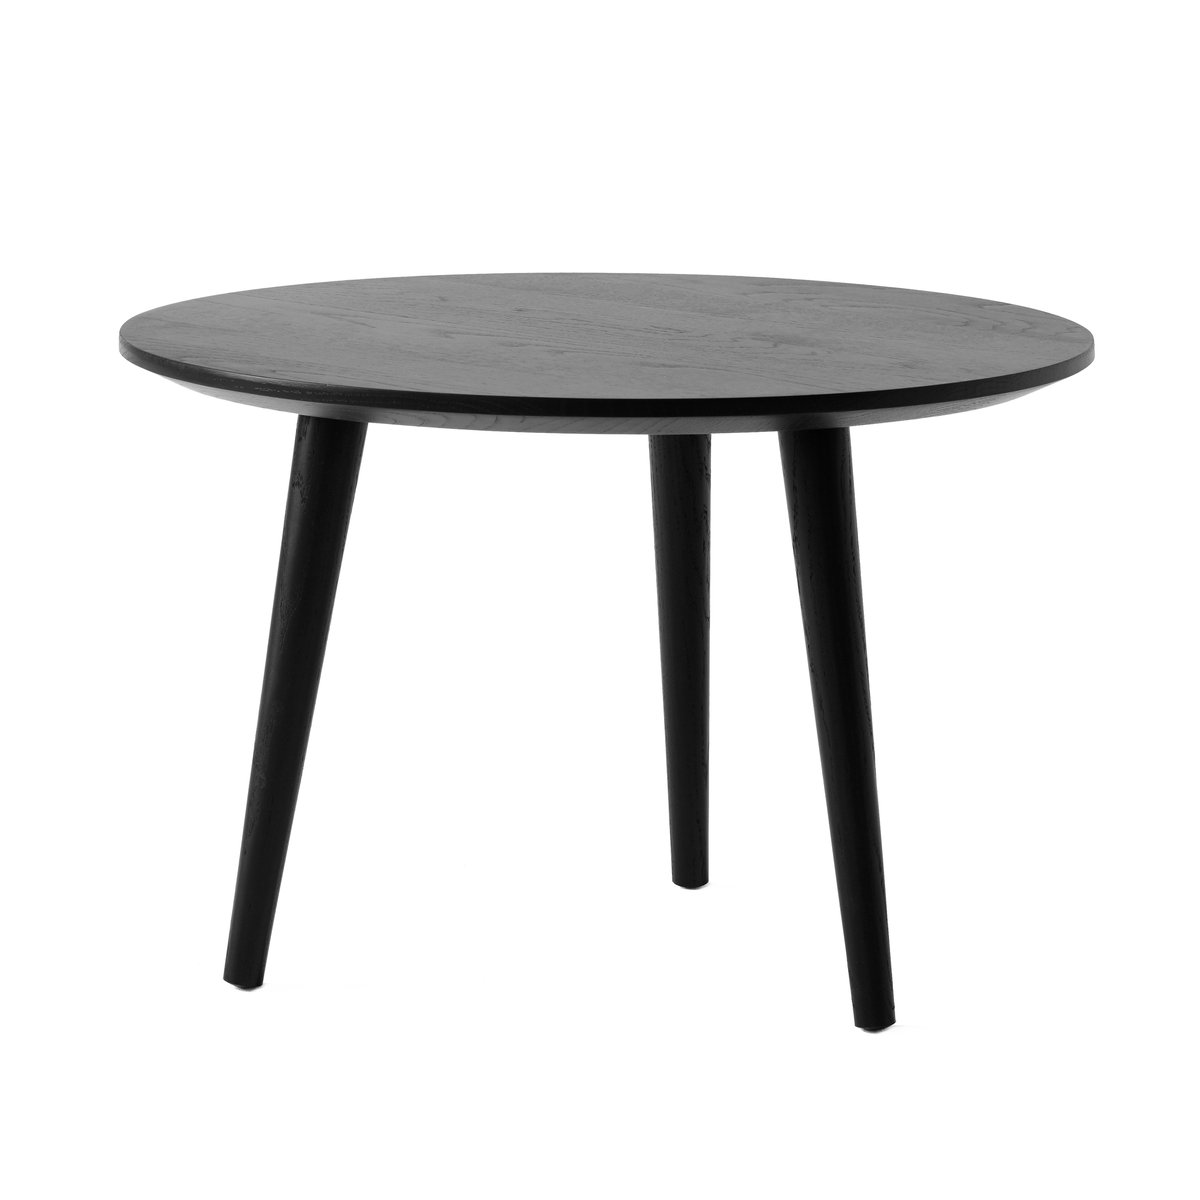 &Tradition In Between sofabord SK14 Ø60 cm Black lacquered oak